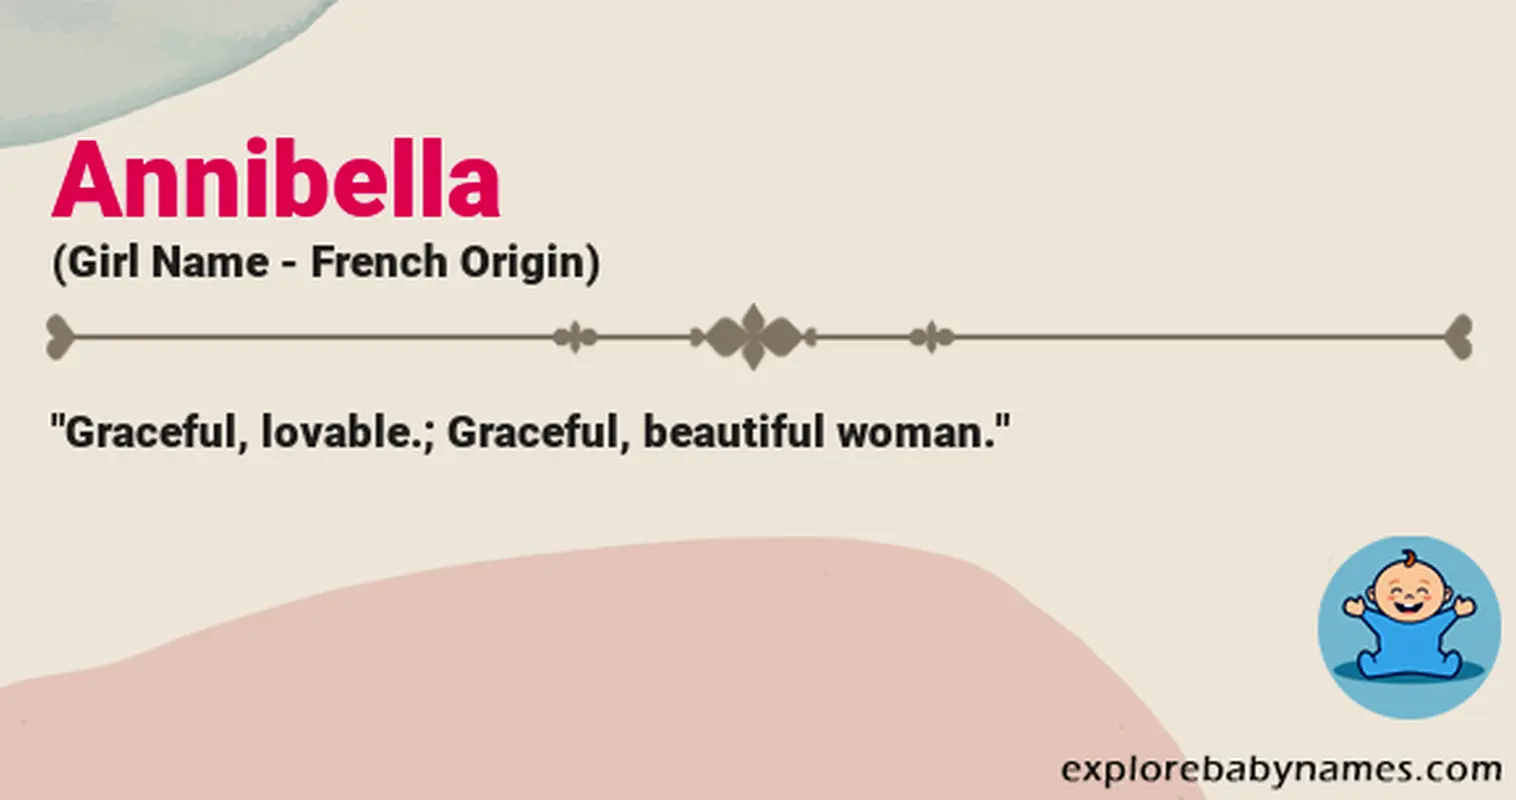 Meaning of Annibella